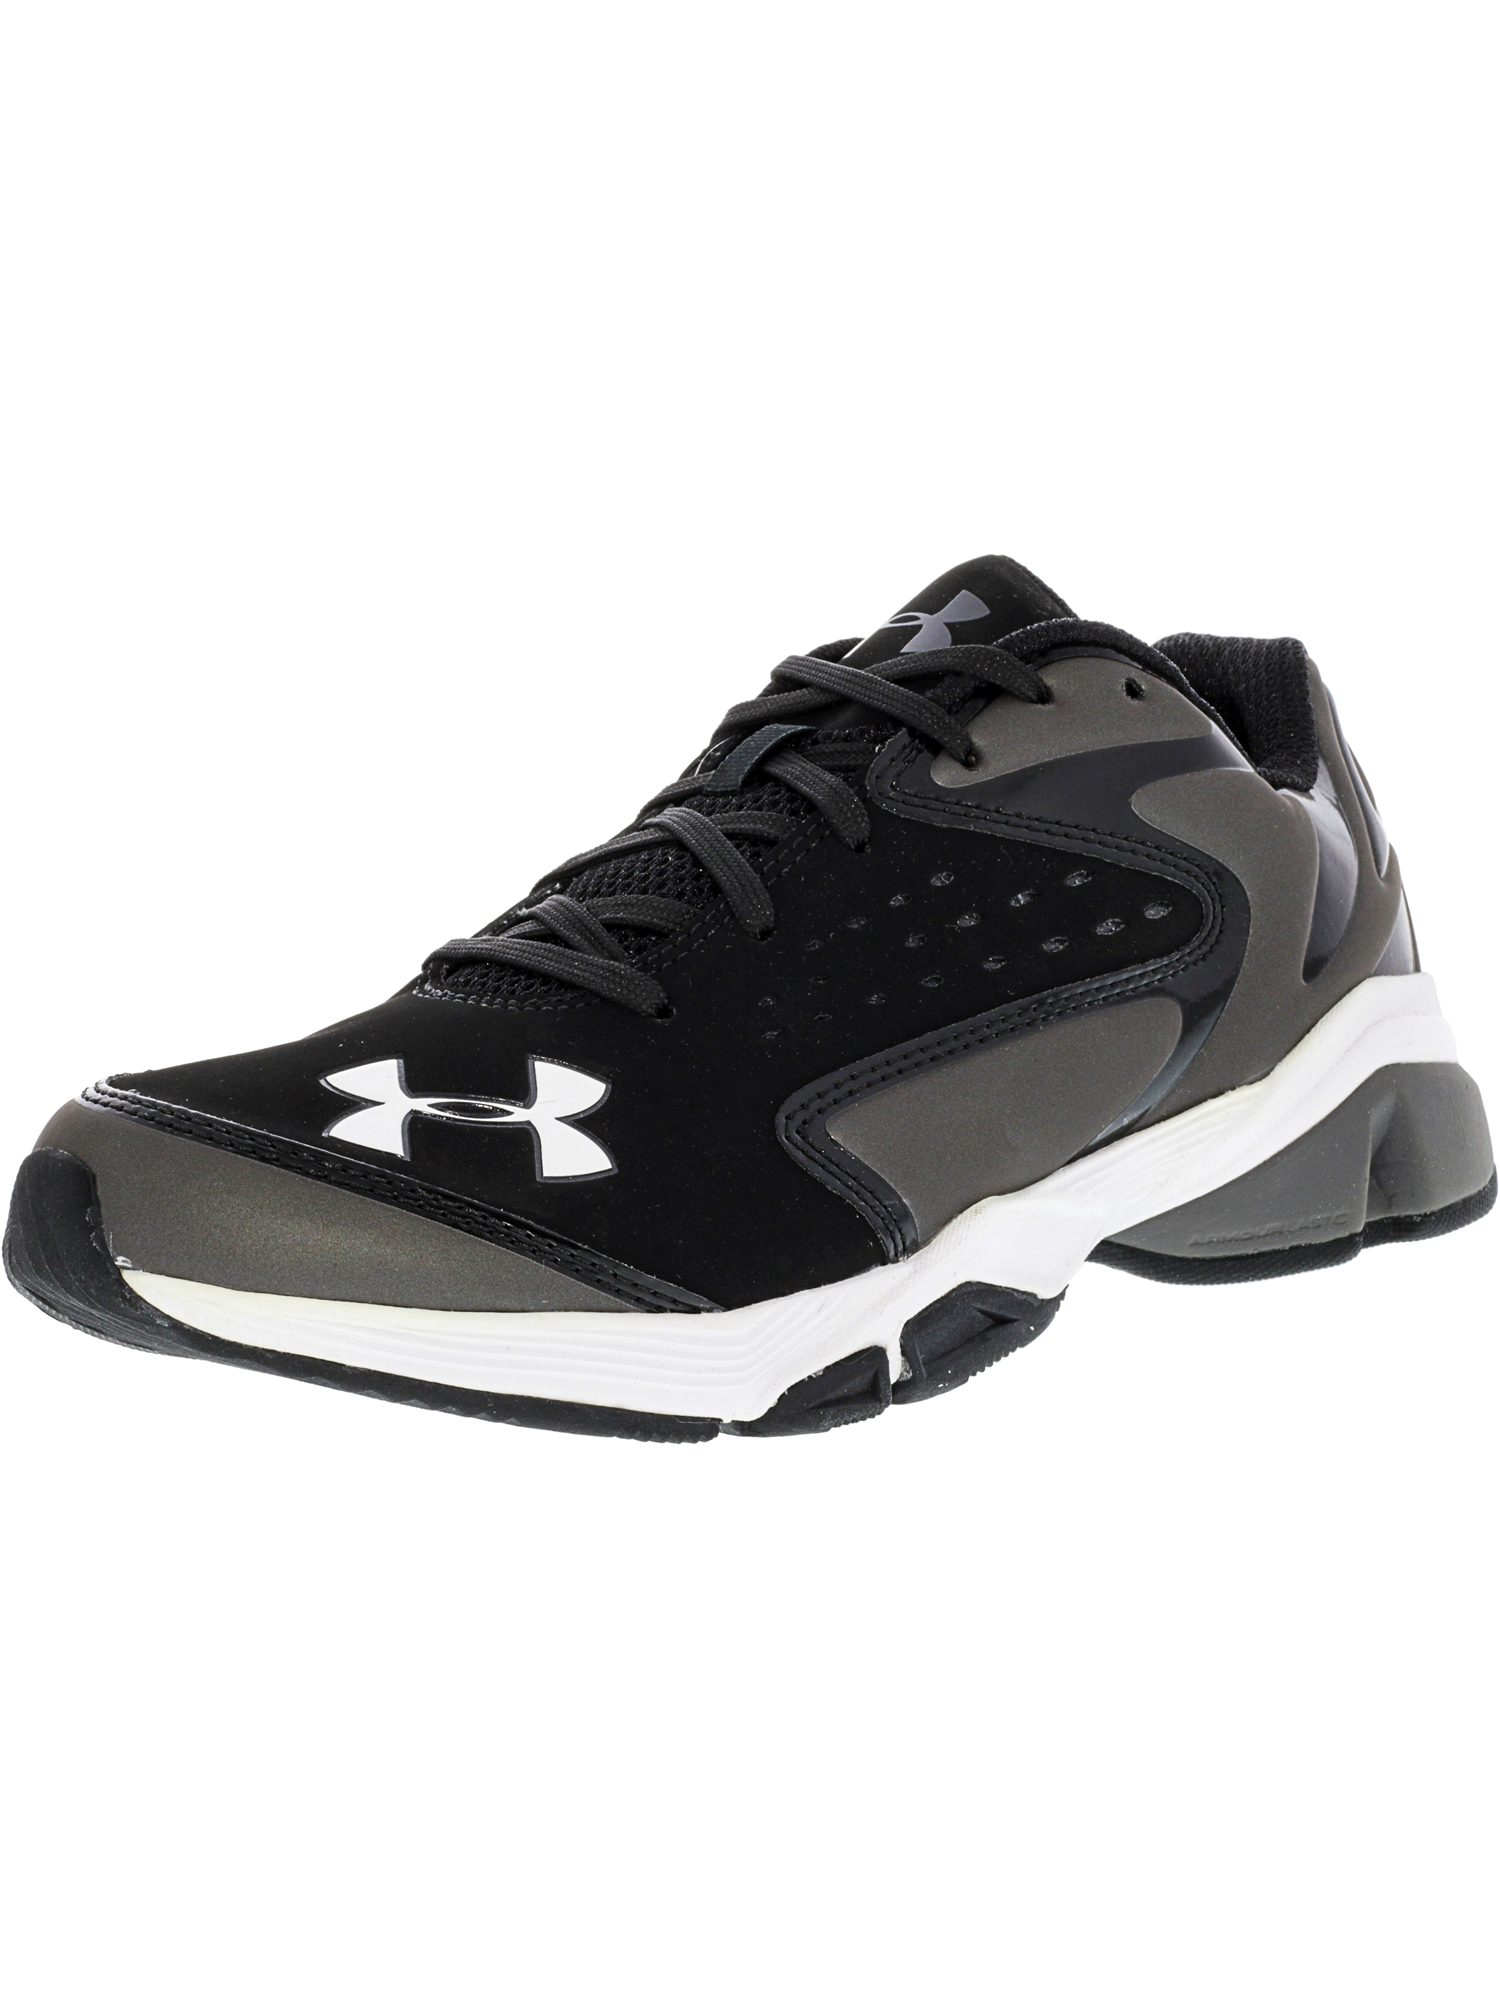 under armour men's yard trainers